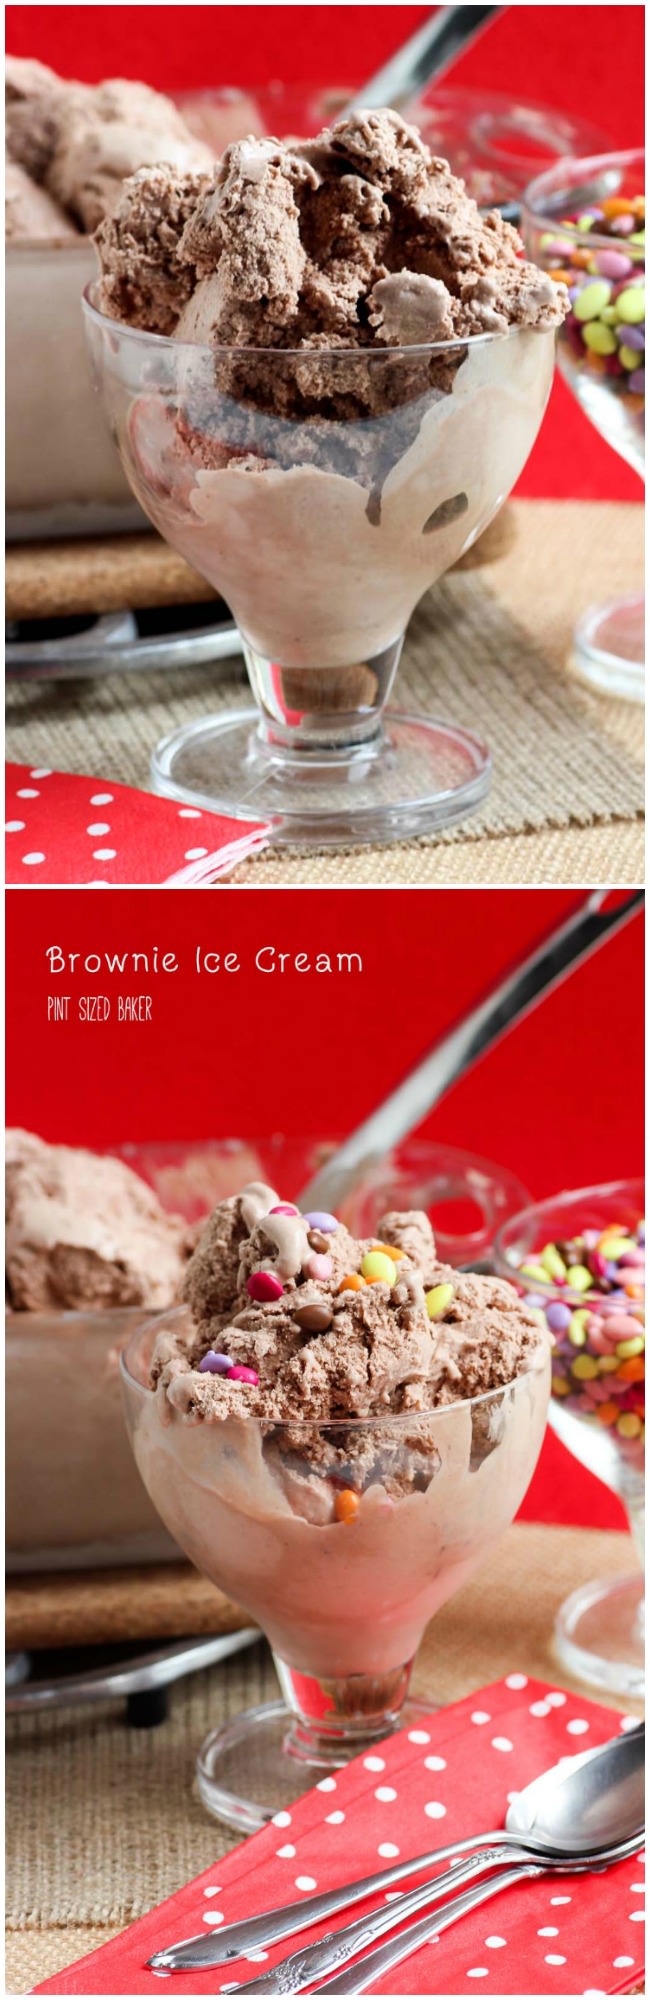 Ice Cream flavored with brownie mix. Tastes like a Wendy's Frosty. It's some good stuff!